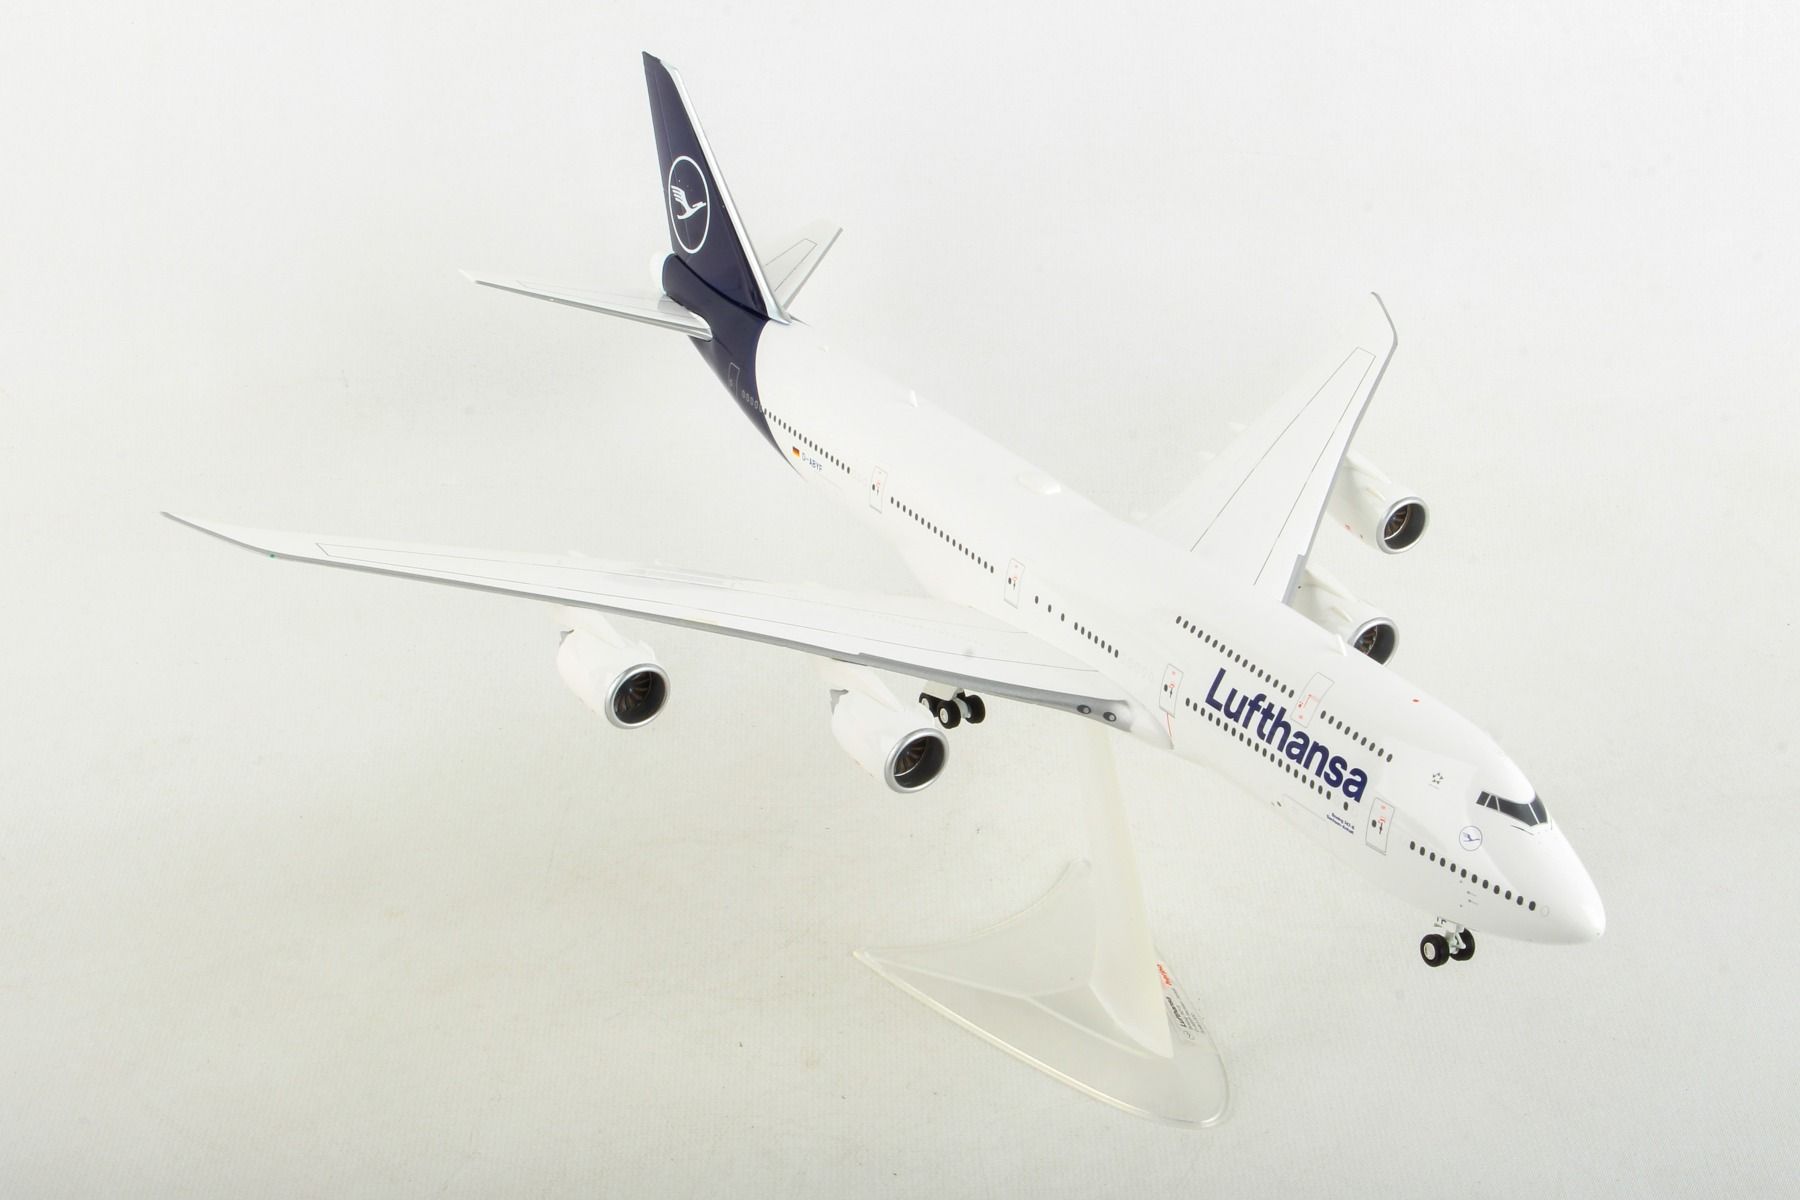 Intercontinental Collectors Item Scale Models Airplane with Stand Press fit Herpa 611930 New 2018 Colors Boeing 747-8 Wings Lufthansa Biplane Making Multi-Colour